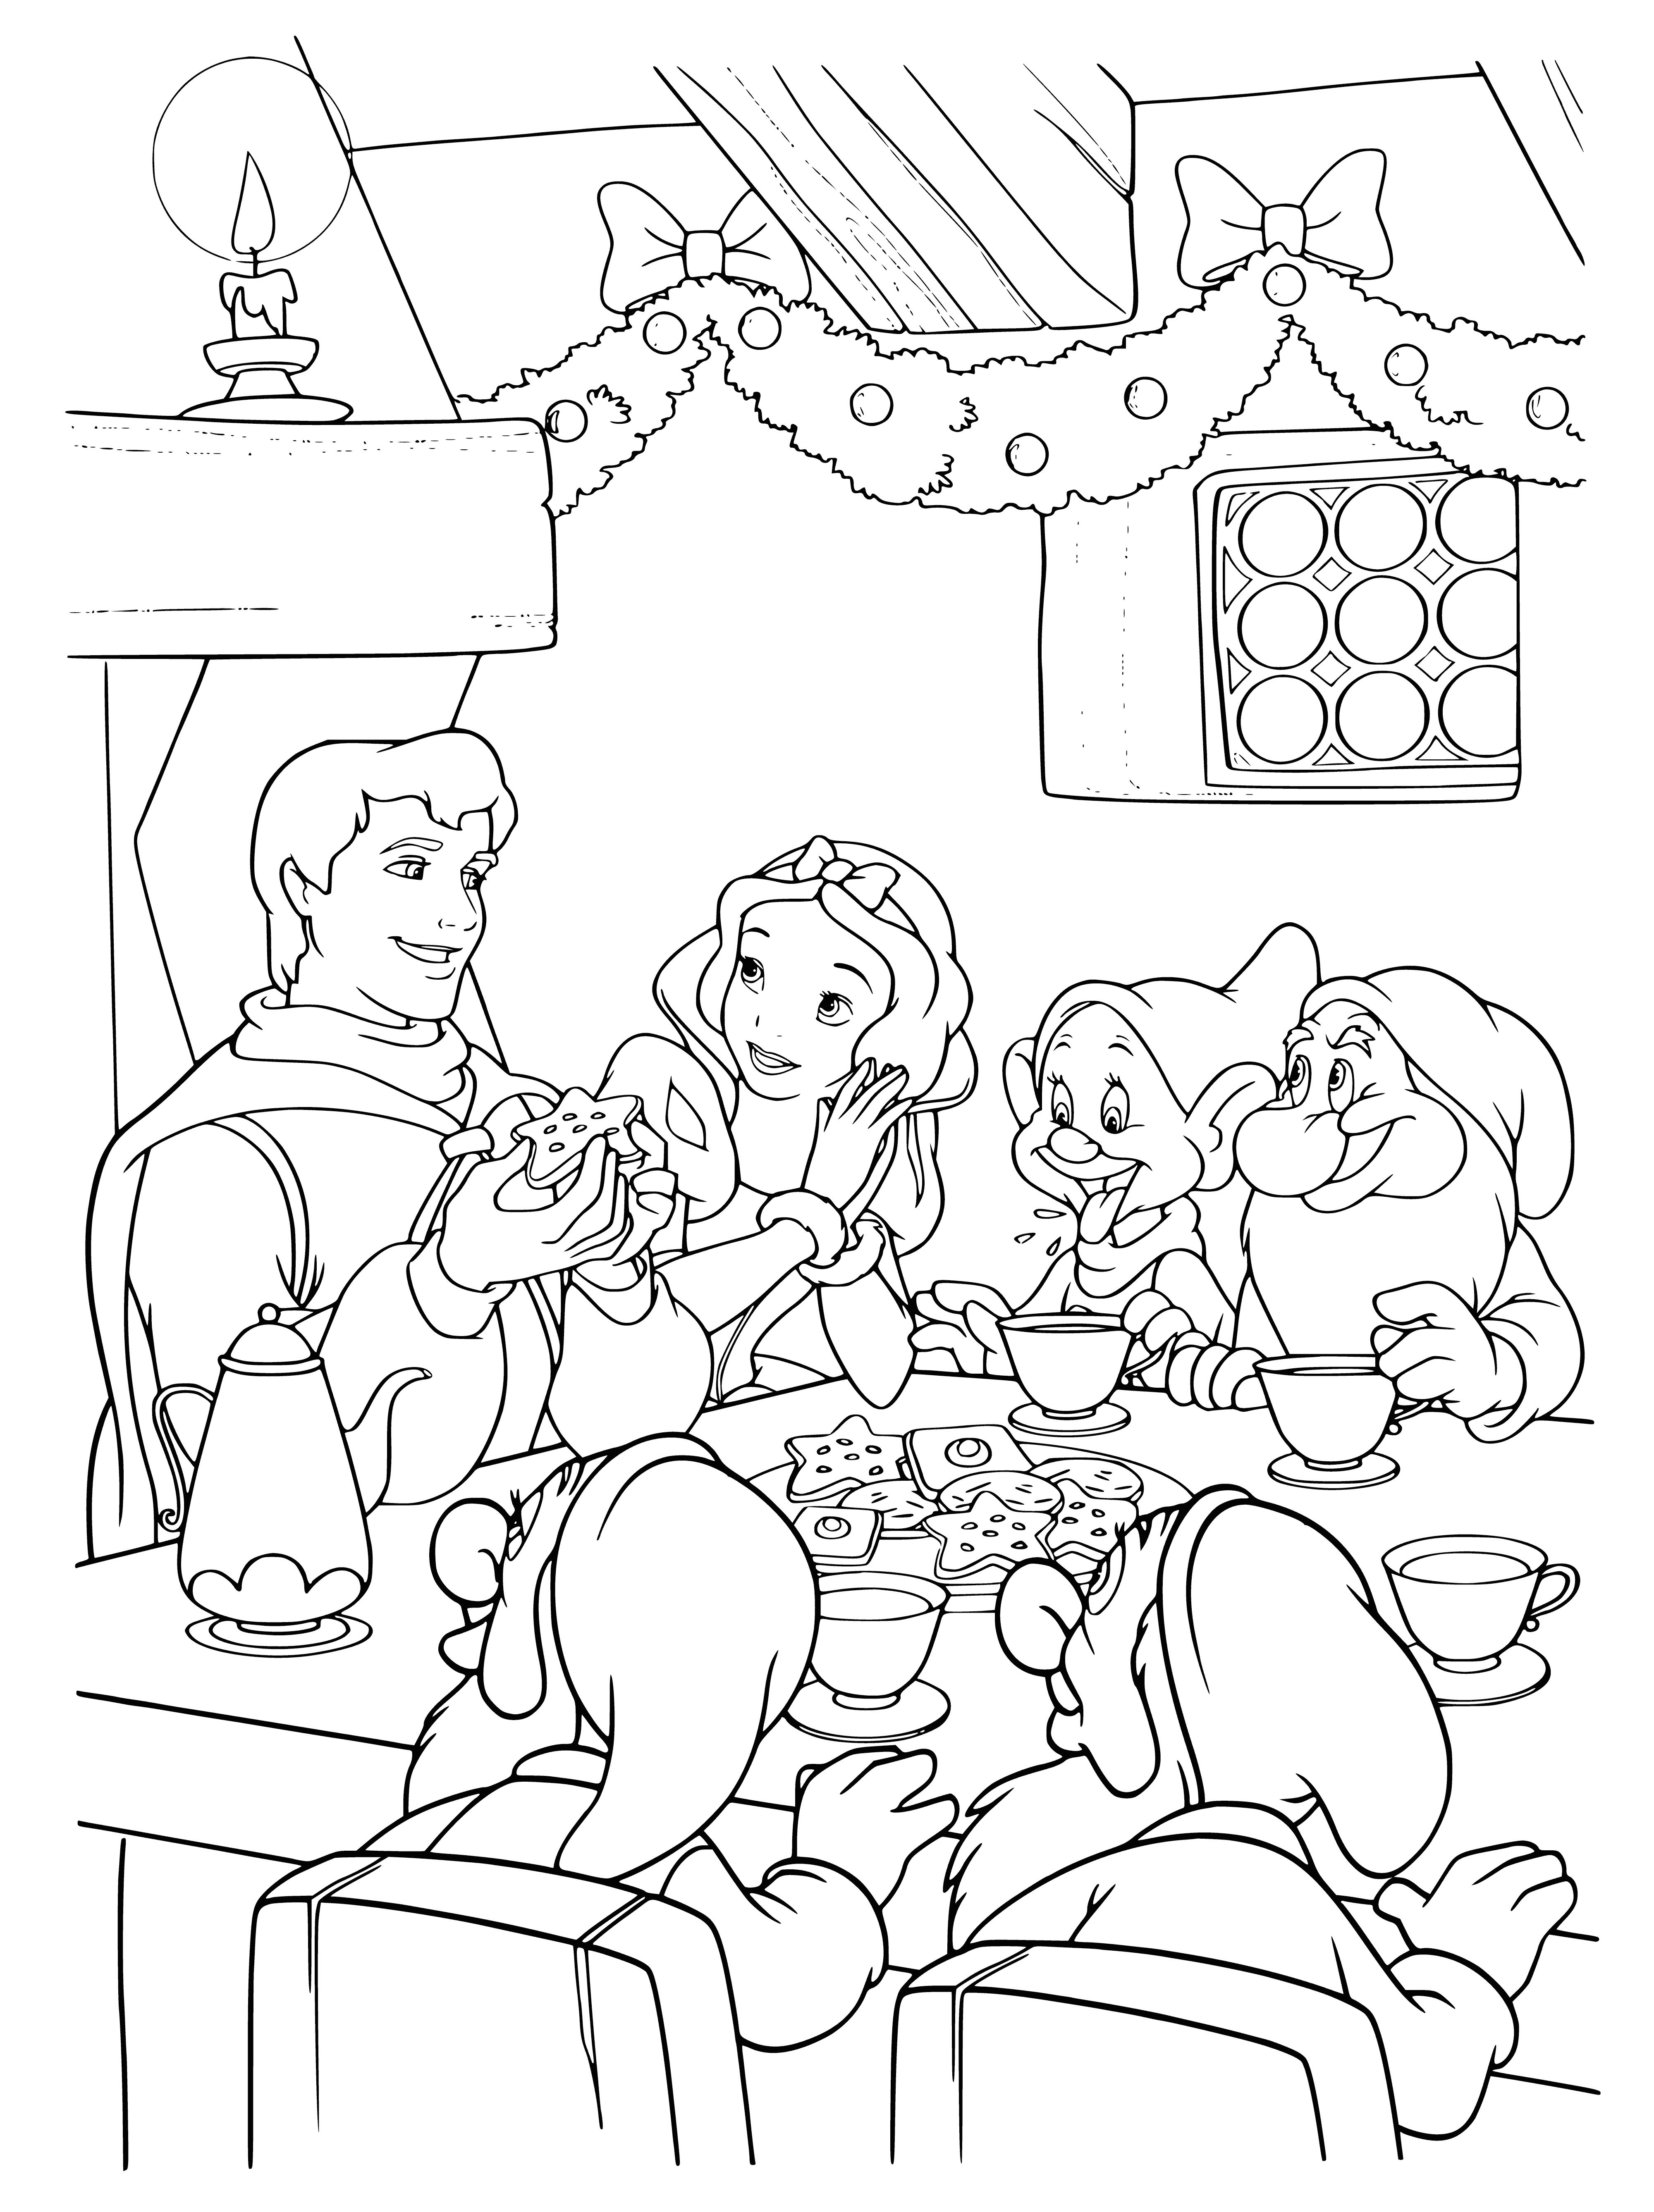 New Year's treat coloring page